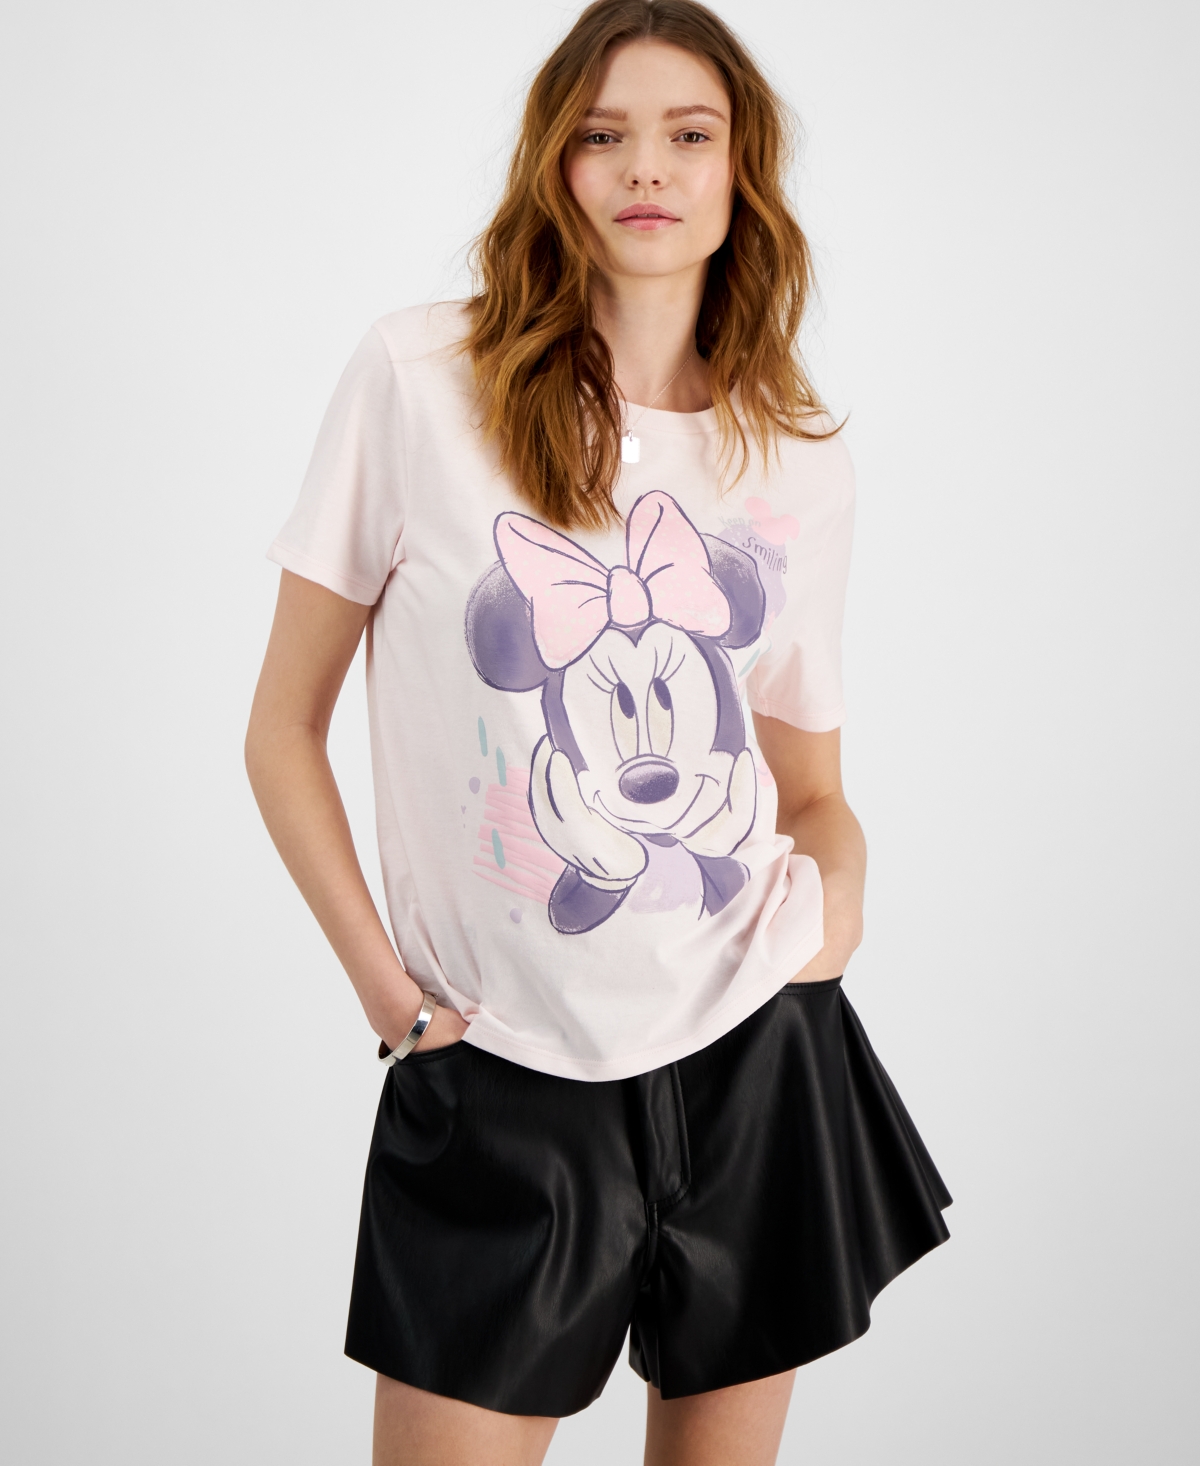 Disney Juniors' Minnie Mouse Short-sleeve Graphic T-shirt In Barely Pink